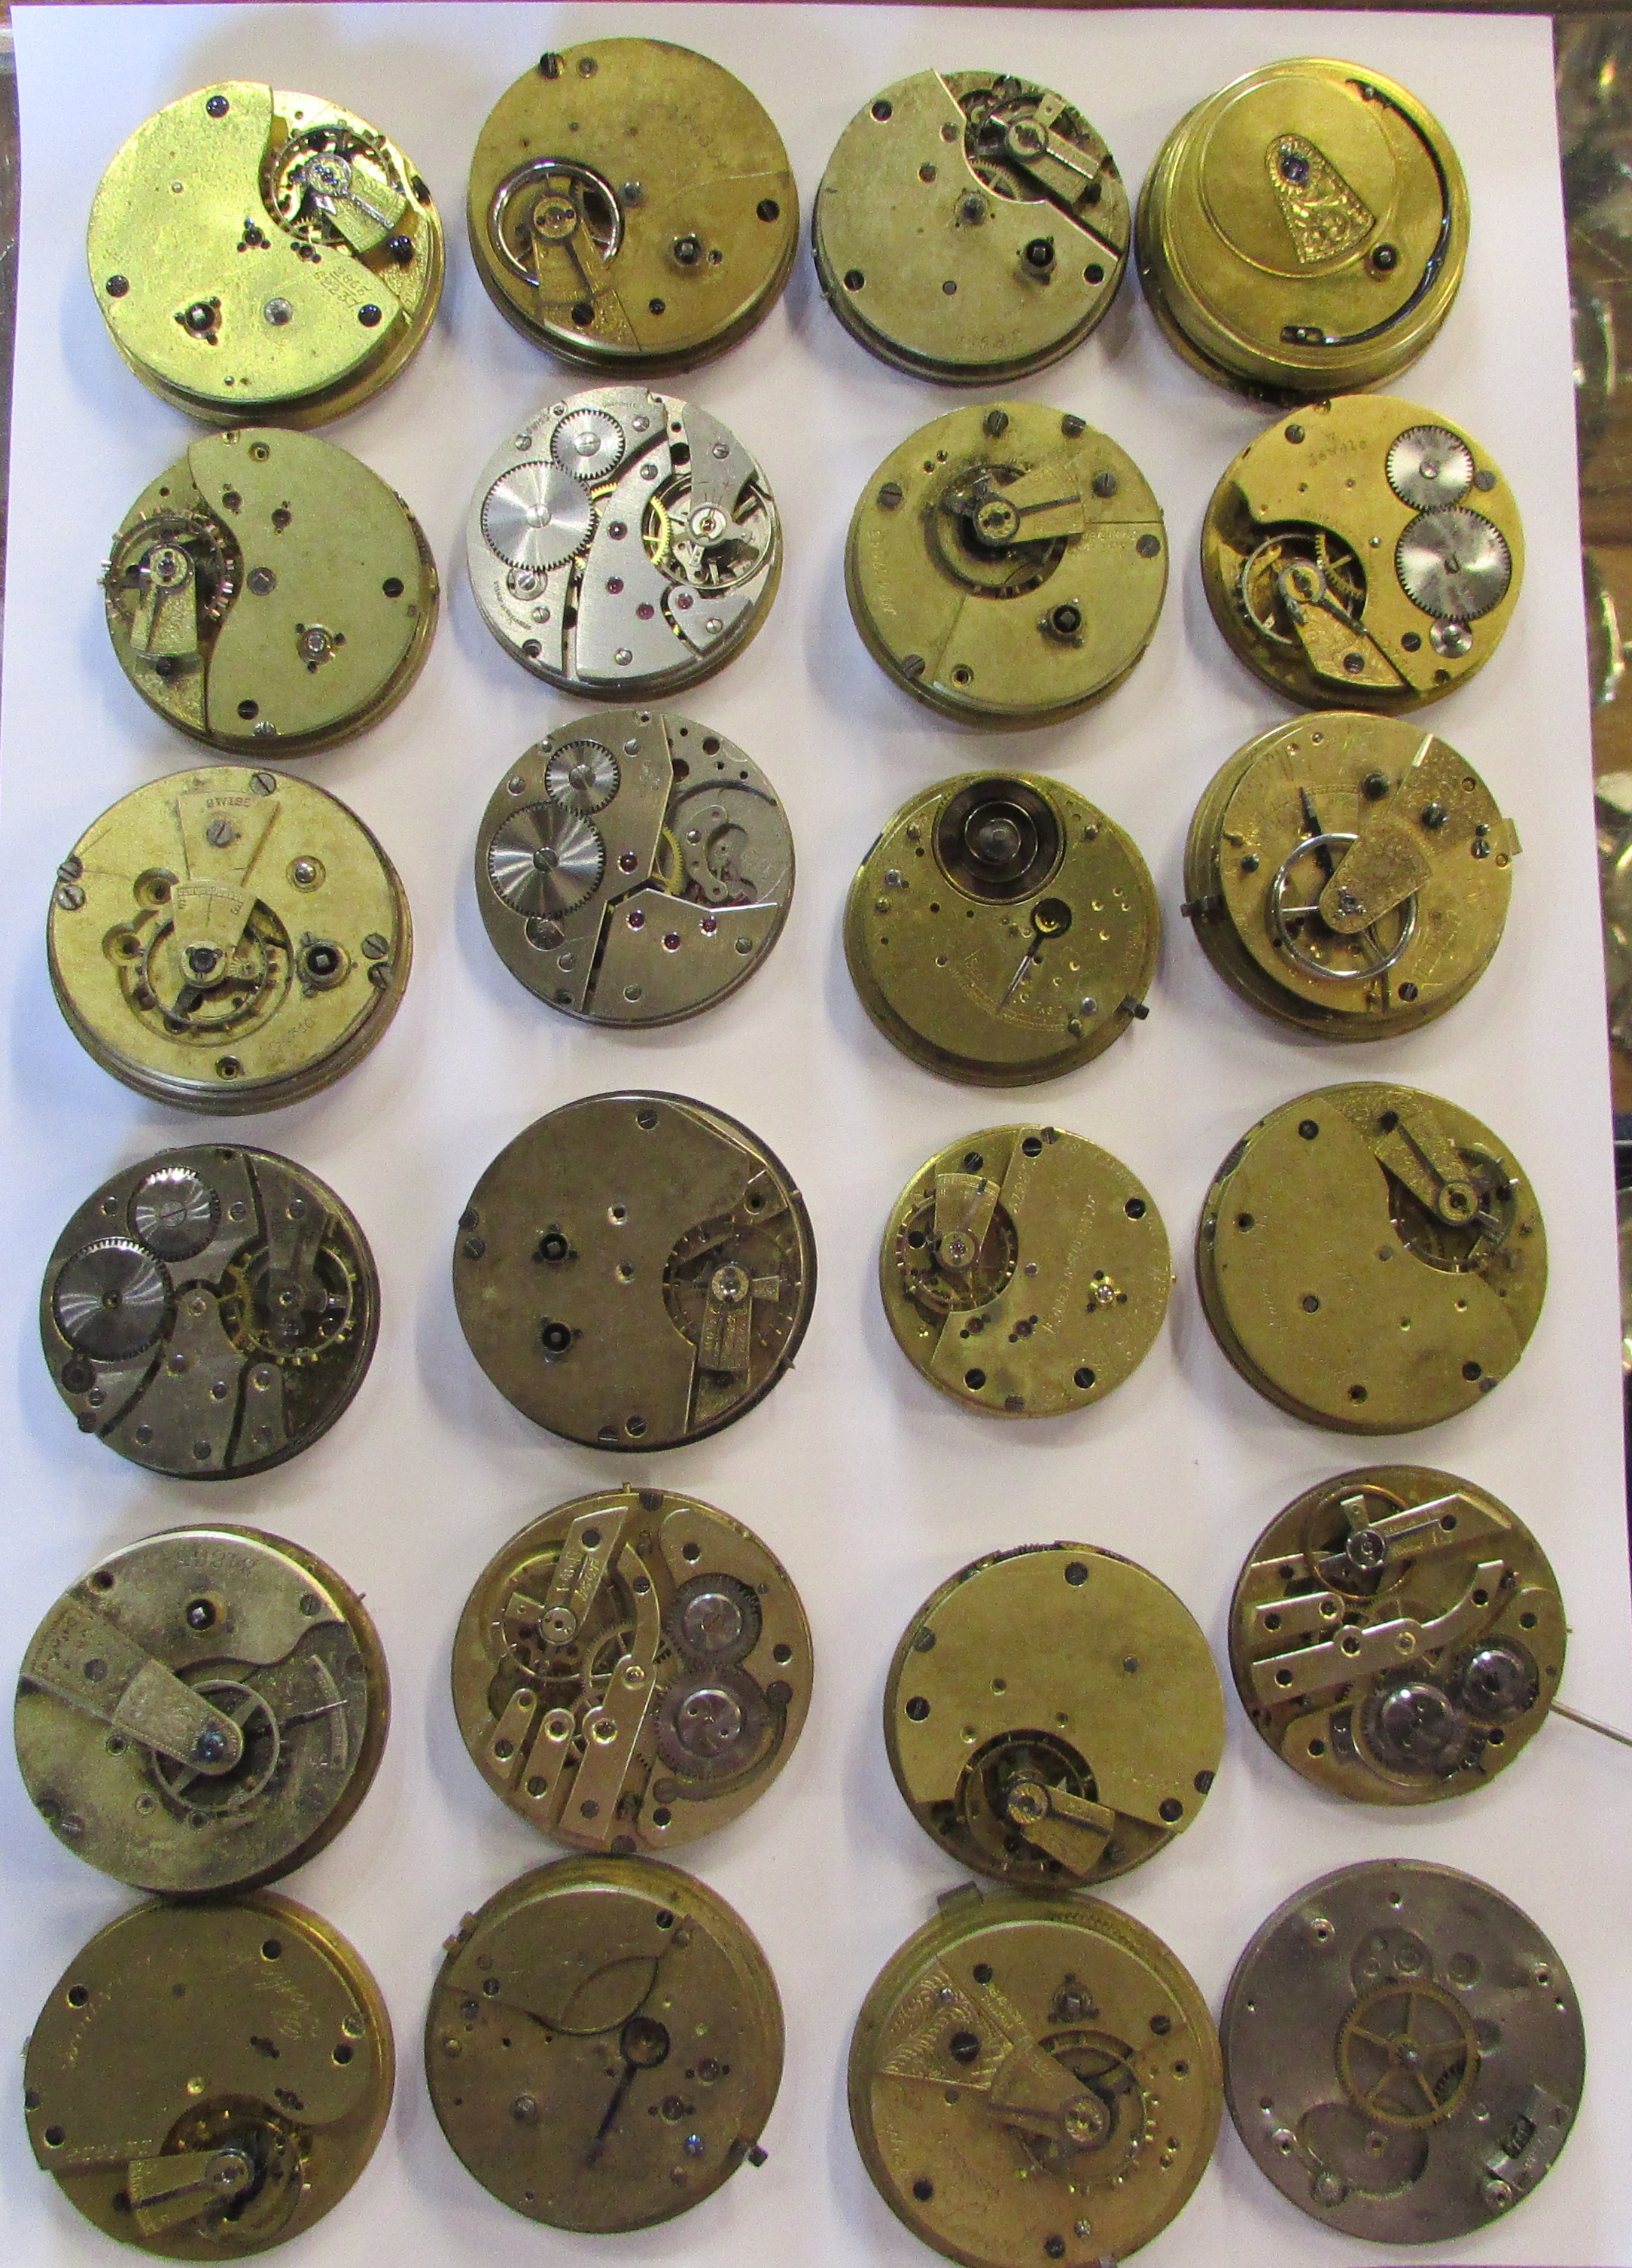 45 pocket watch movements and dials for spares or repairs, including makers Montine of Switzerland, - Image 2 of 3